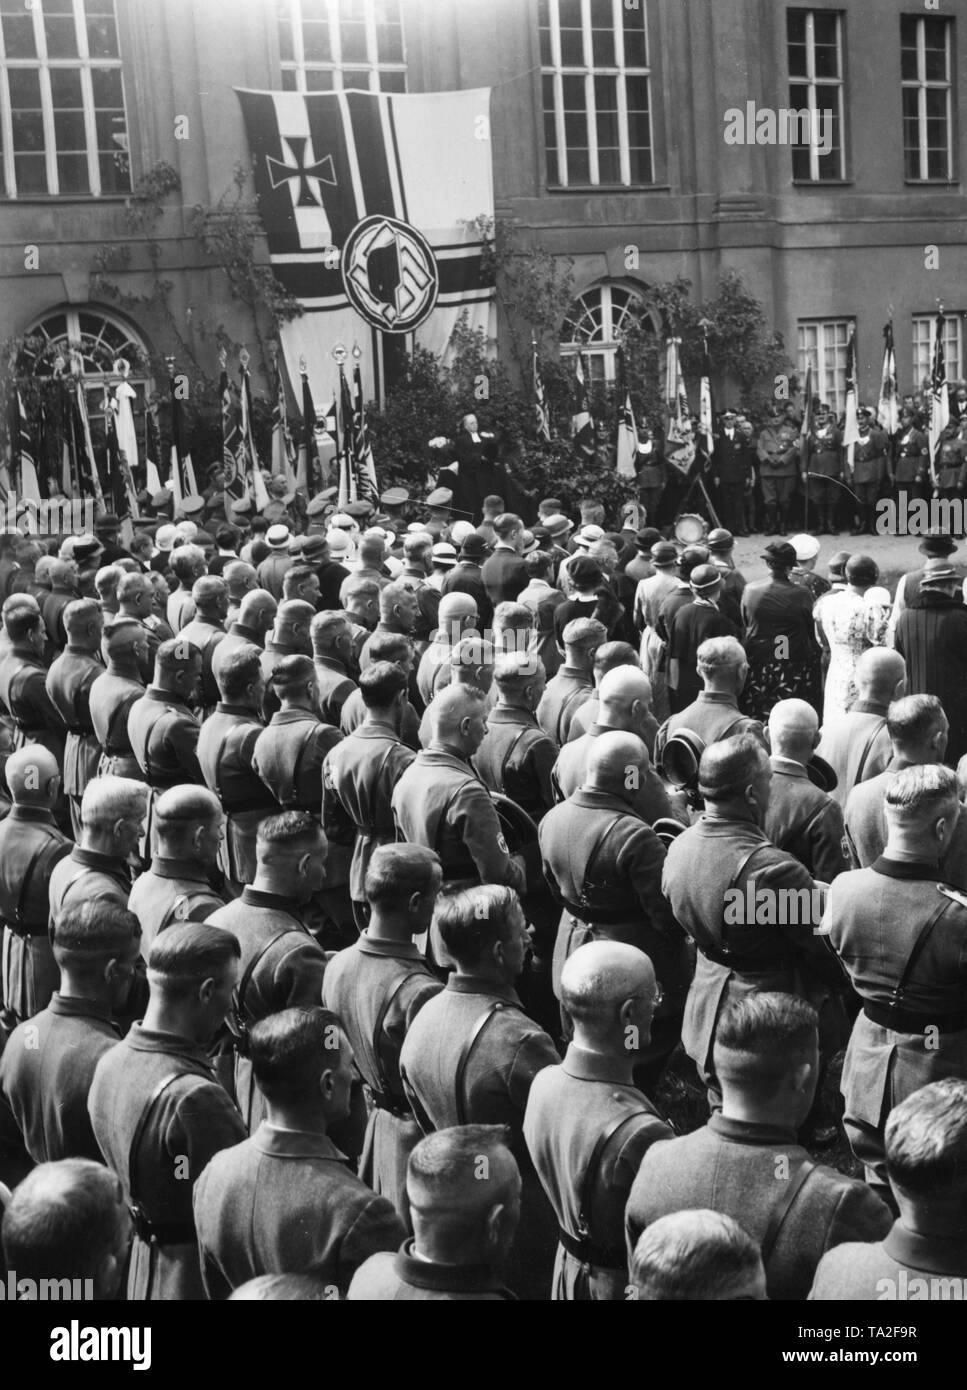 On the occasion of the 10-year traditional celebration of the Ortsgruppe (local group) Pankow-Niederschoenhausen of the Stahlhelm, a camp service takes place in front of Schoenhausen Palace in Berlin. Here, during the memorial. Stock Photo